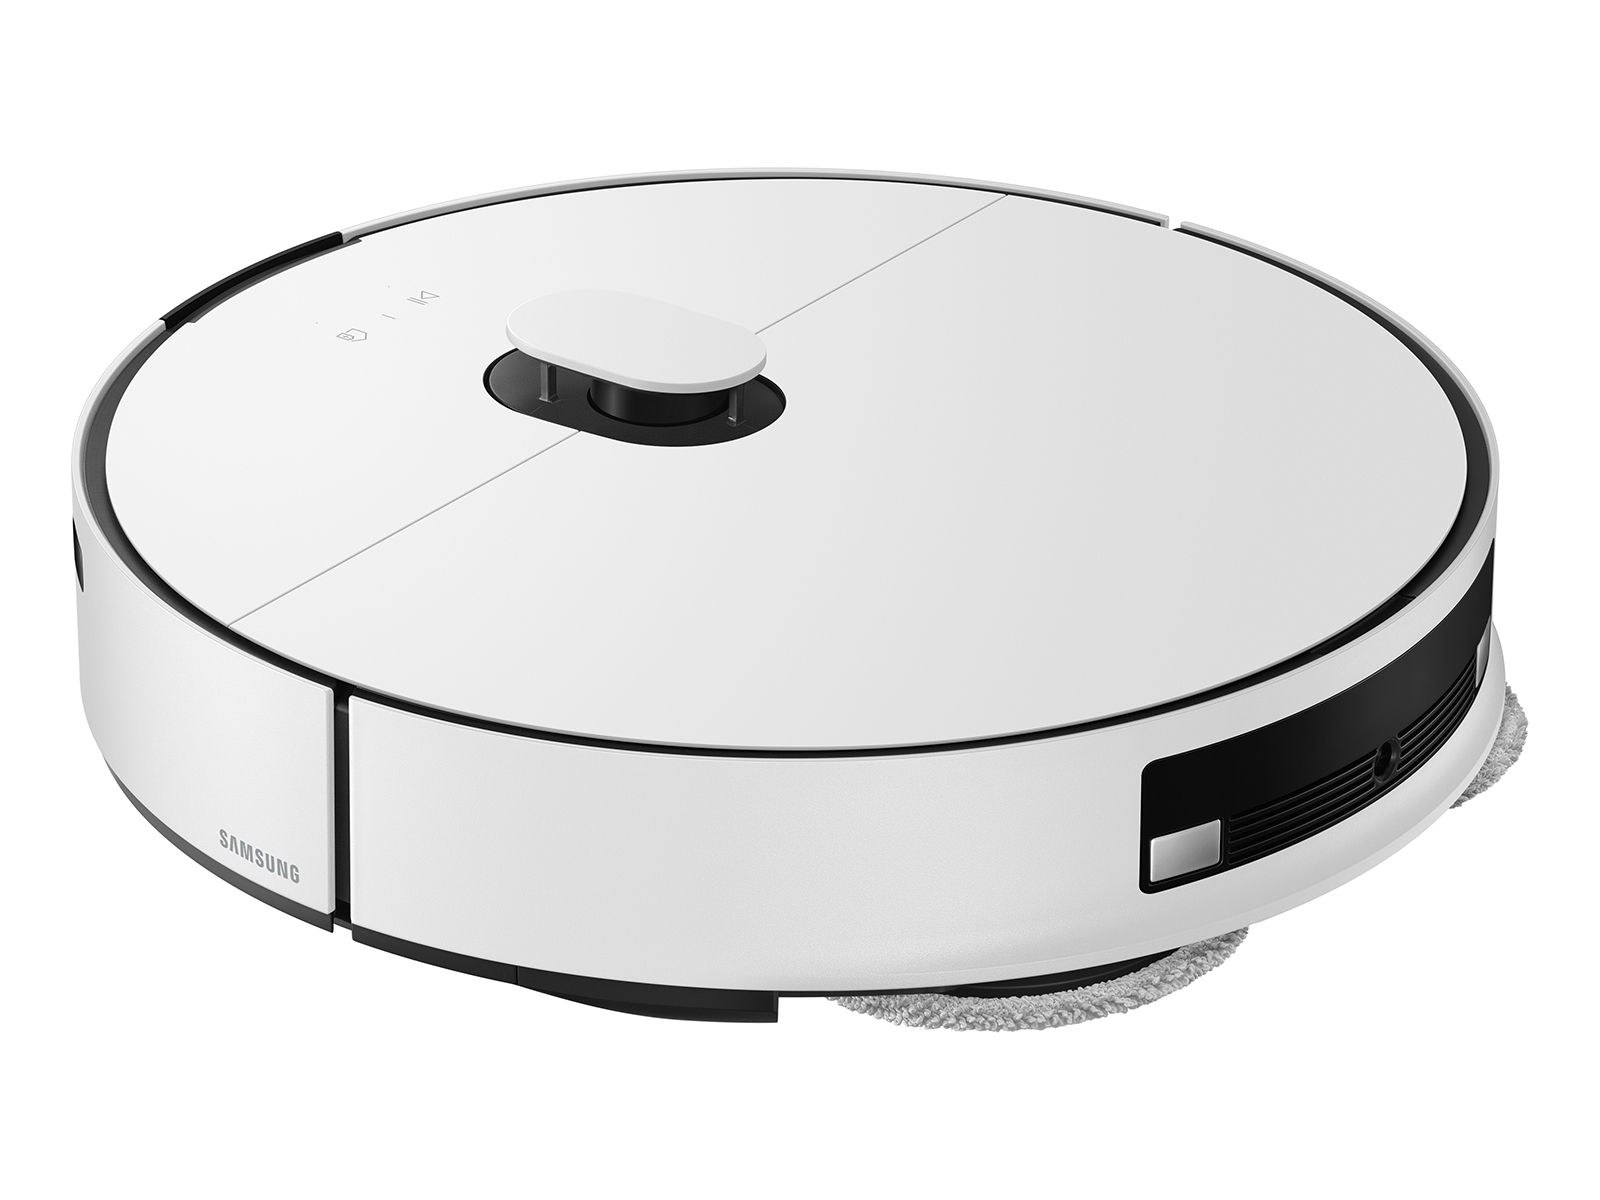 Thumbnail image of Bespoke Jet Bot Combo&trade; Robot Vacuum and Mop with All-in-One Clean Station&reg; with Auto Steam